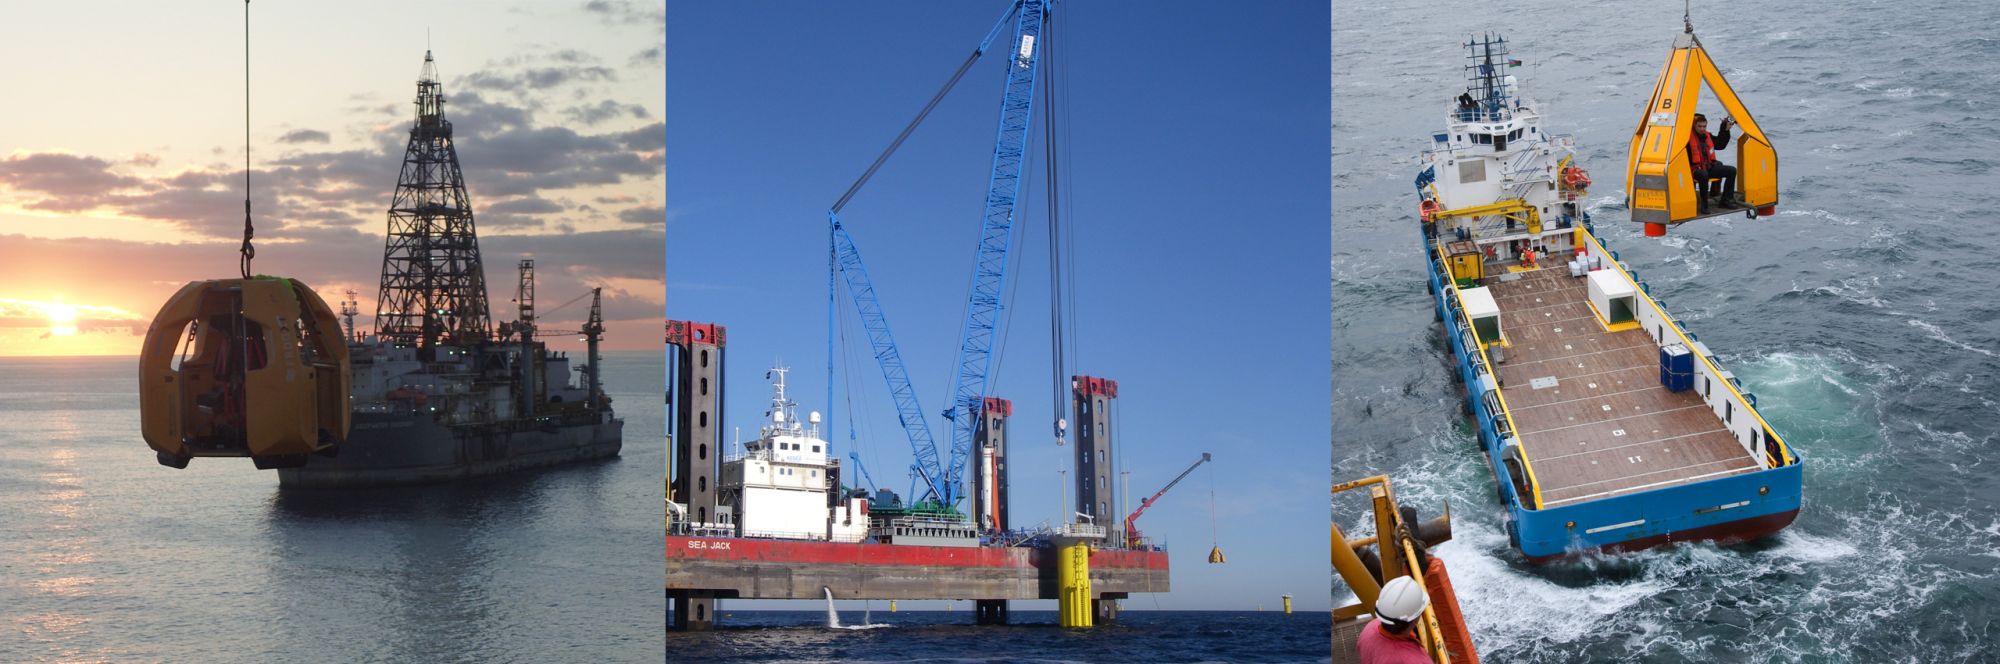 Three images, each showing a safe transfer using the Reflex Marine crane system.